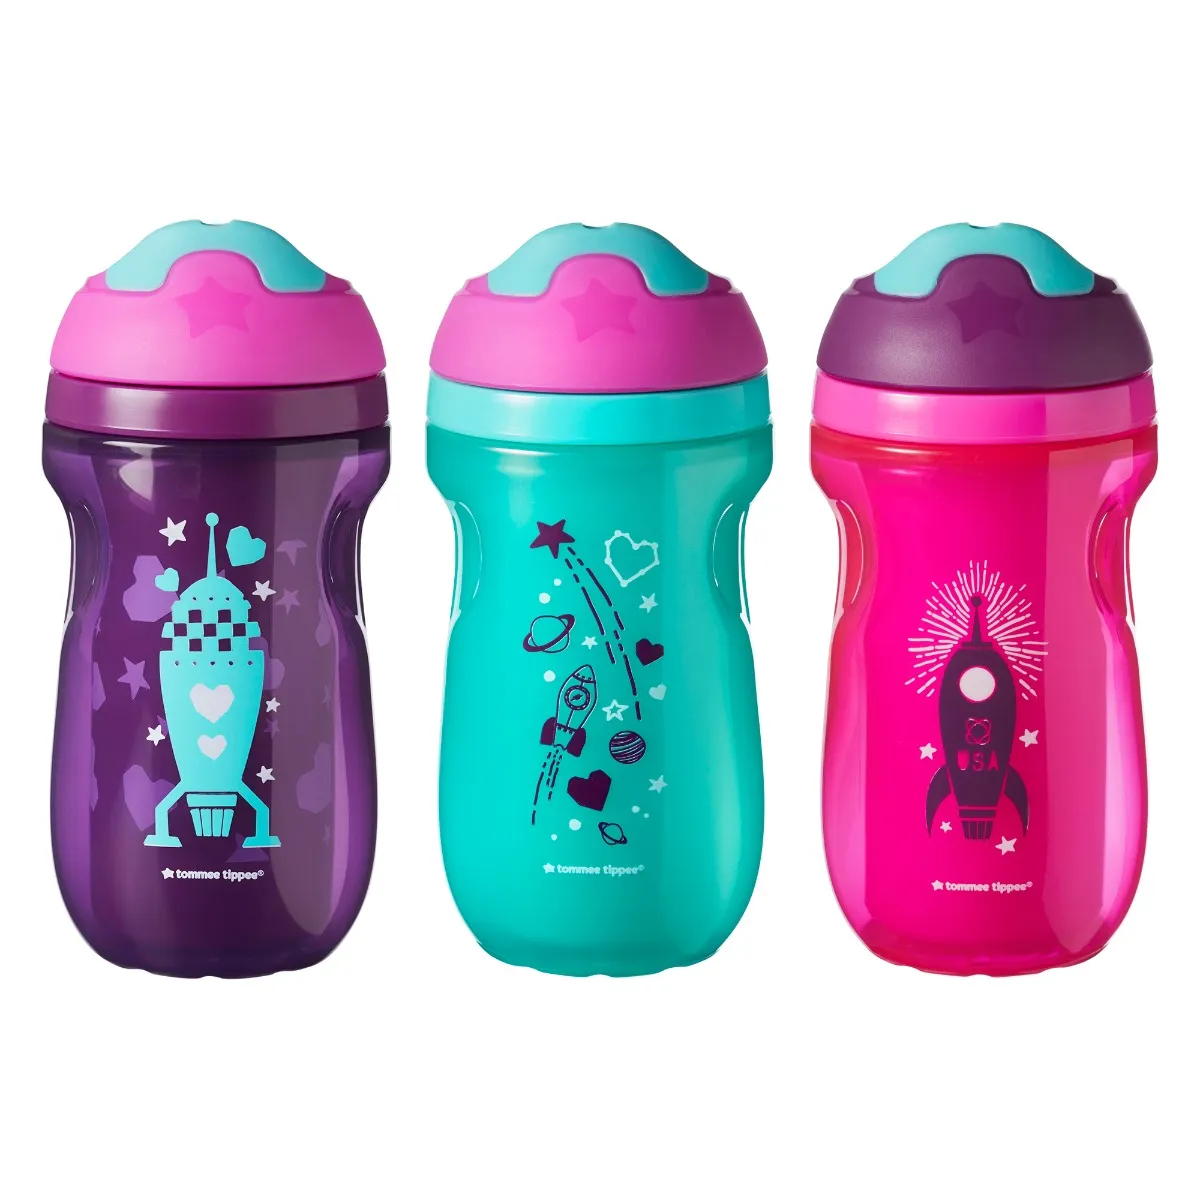 Tommee Tippee Sippee Cup Toddler 12 Mo + USA Space Rocket Non